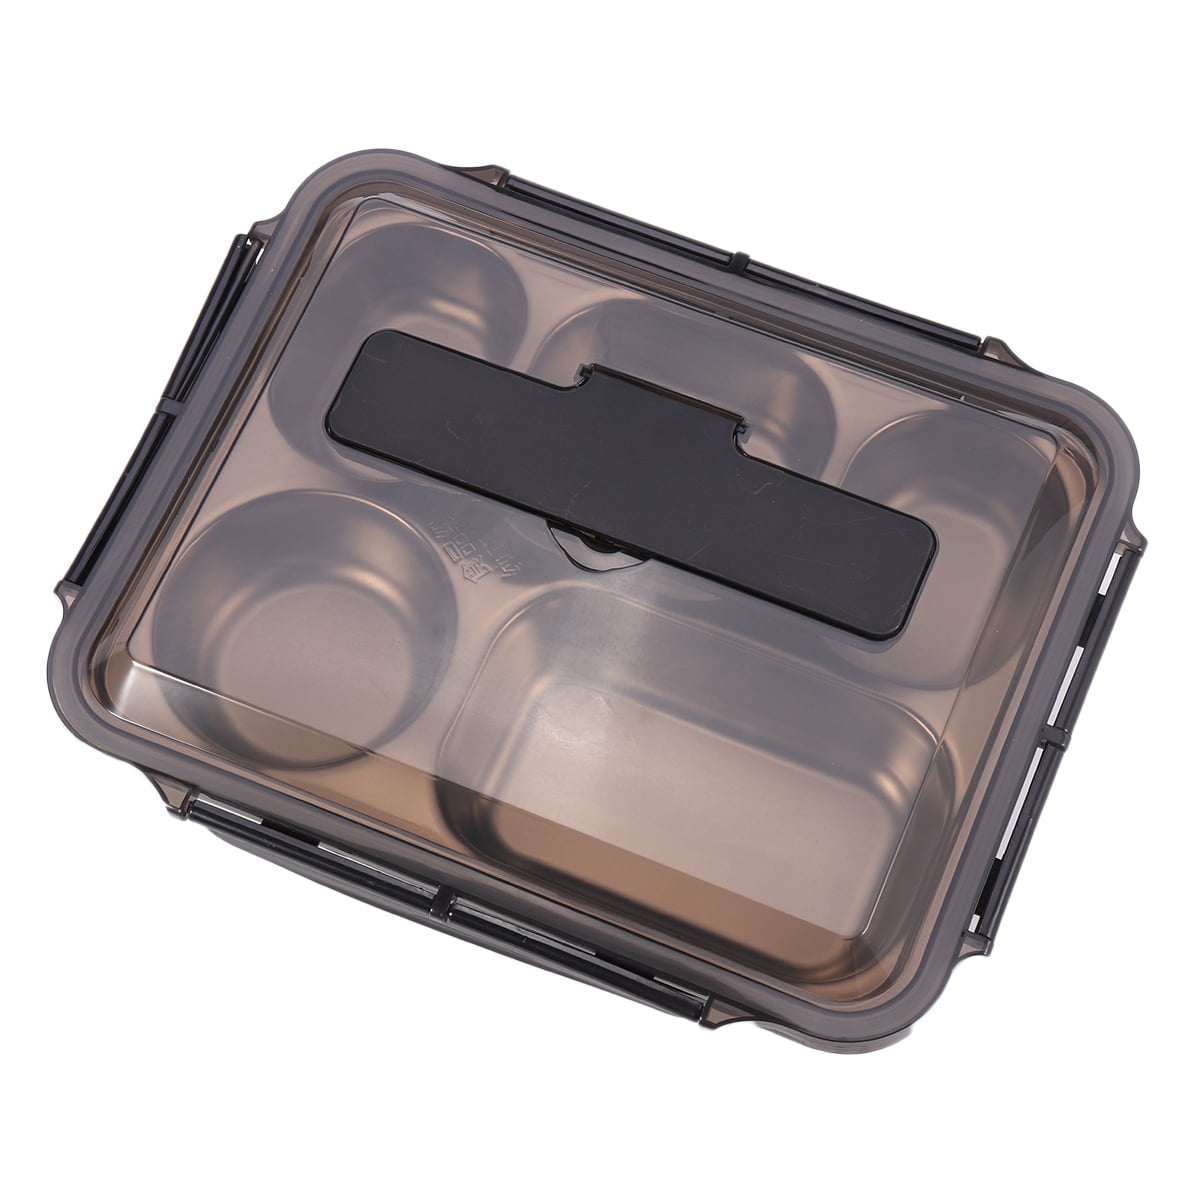 Can be carried upright ♪ Thin lunch box Foodman 600ml --A leak-resistant  4-point lock and a special case []